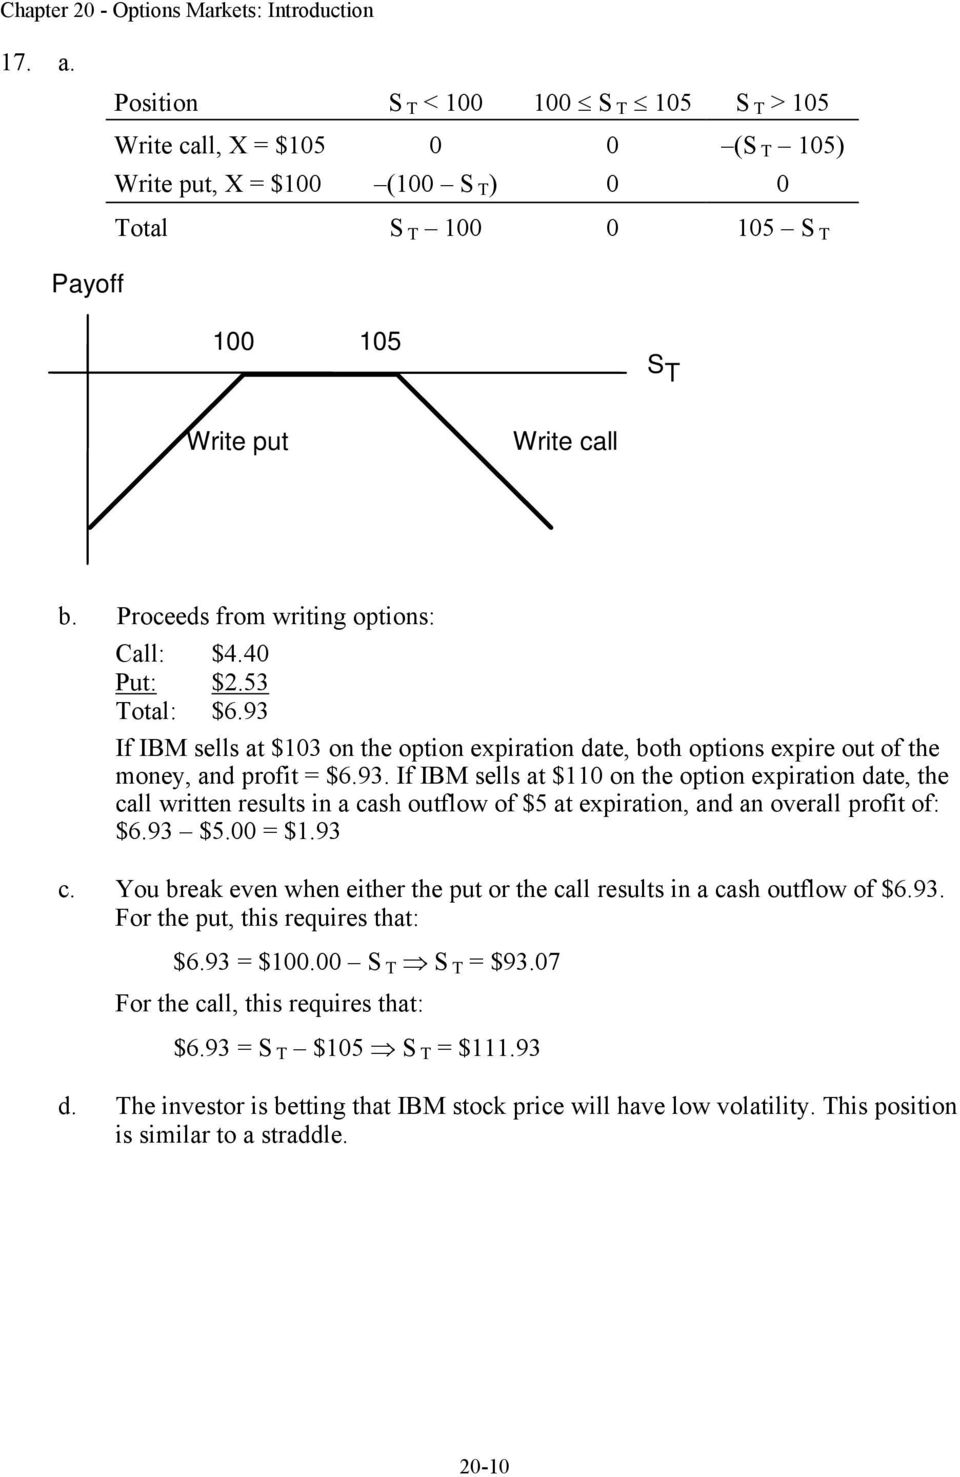 93 $5.00 = $1.93 c. You break even when either the put or the call results in a cash outflow of $6.93. For the put, this requires that: $6.93 = $100.00 = $93.07 For the call, this requires that: $6.